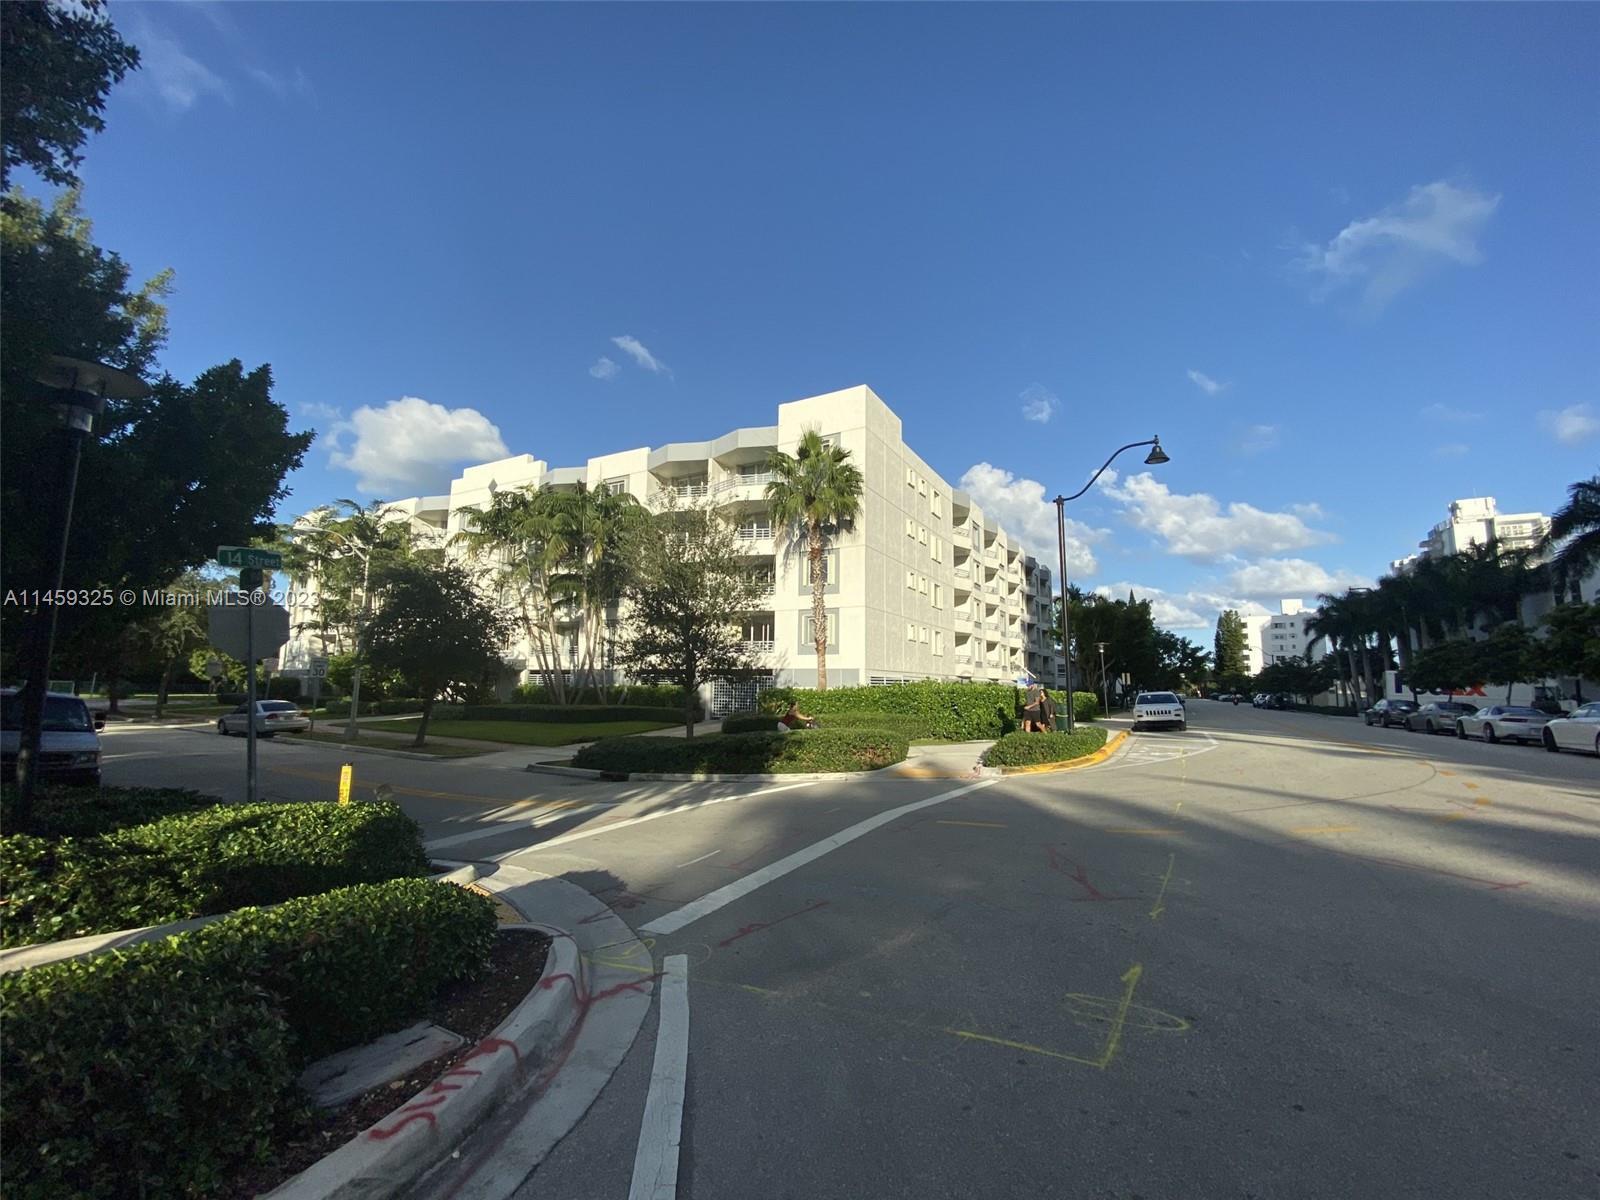 The Sails is quaint 5-story boutique condominium right in the heart of South Beach. Short distance t